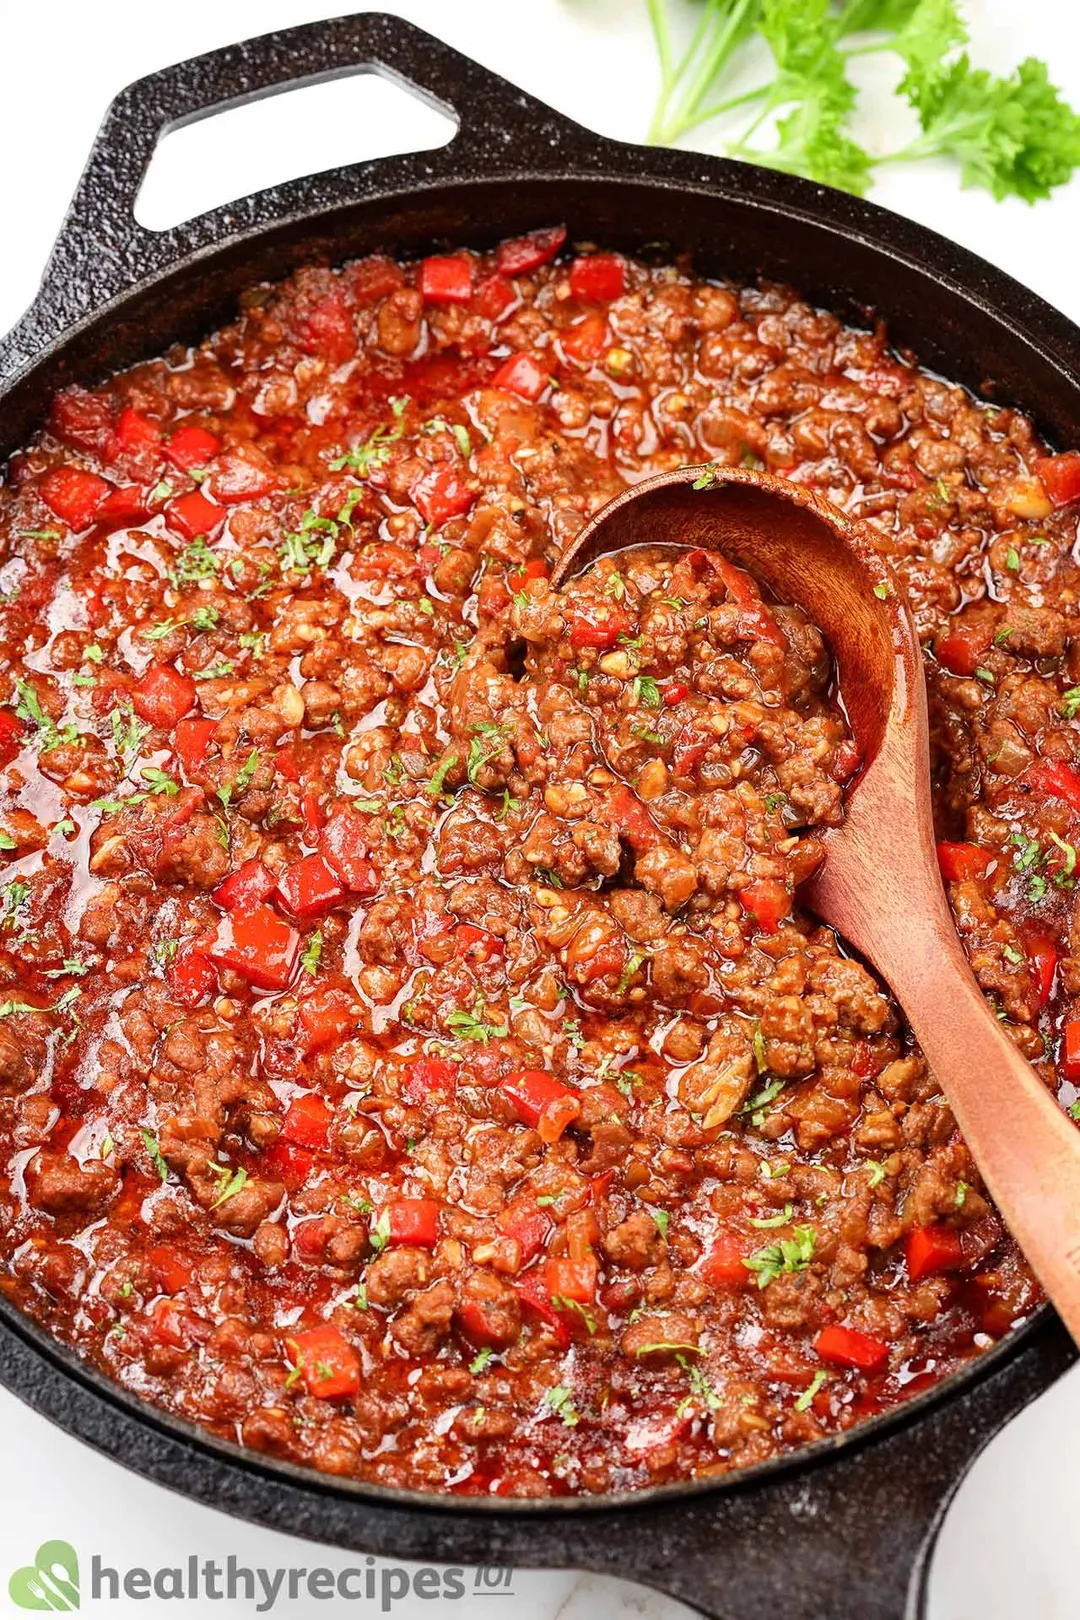 a cast iron skillet of cooked ground beef with pepper and a wooden spoon in it